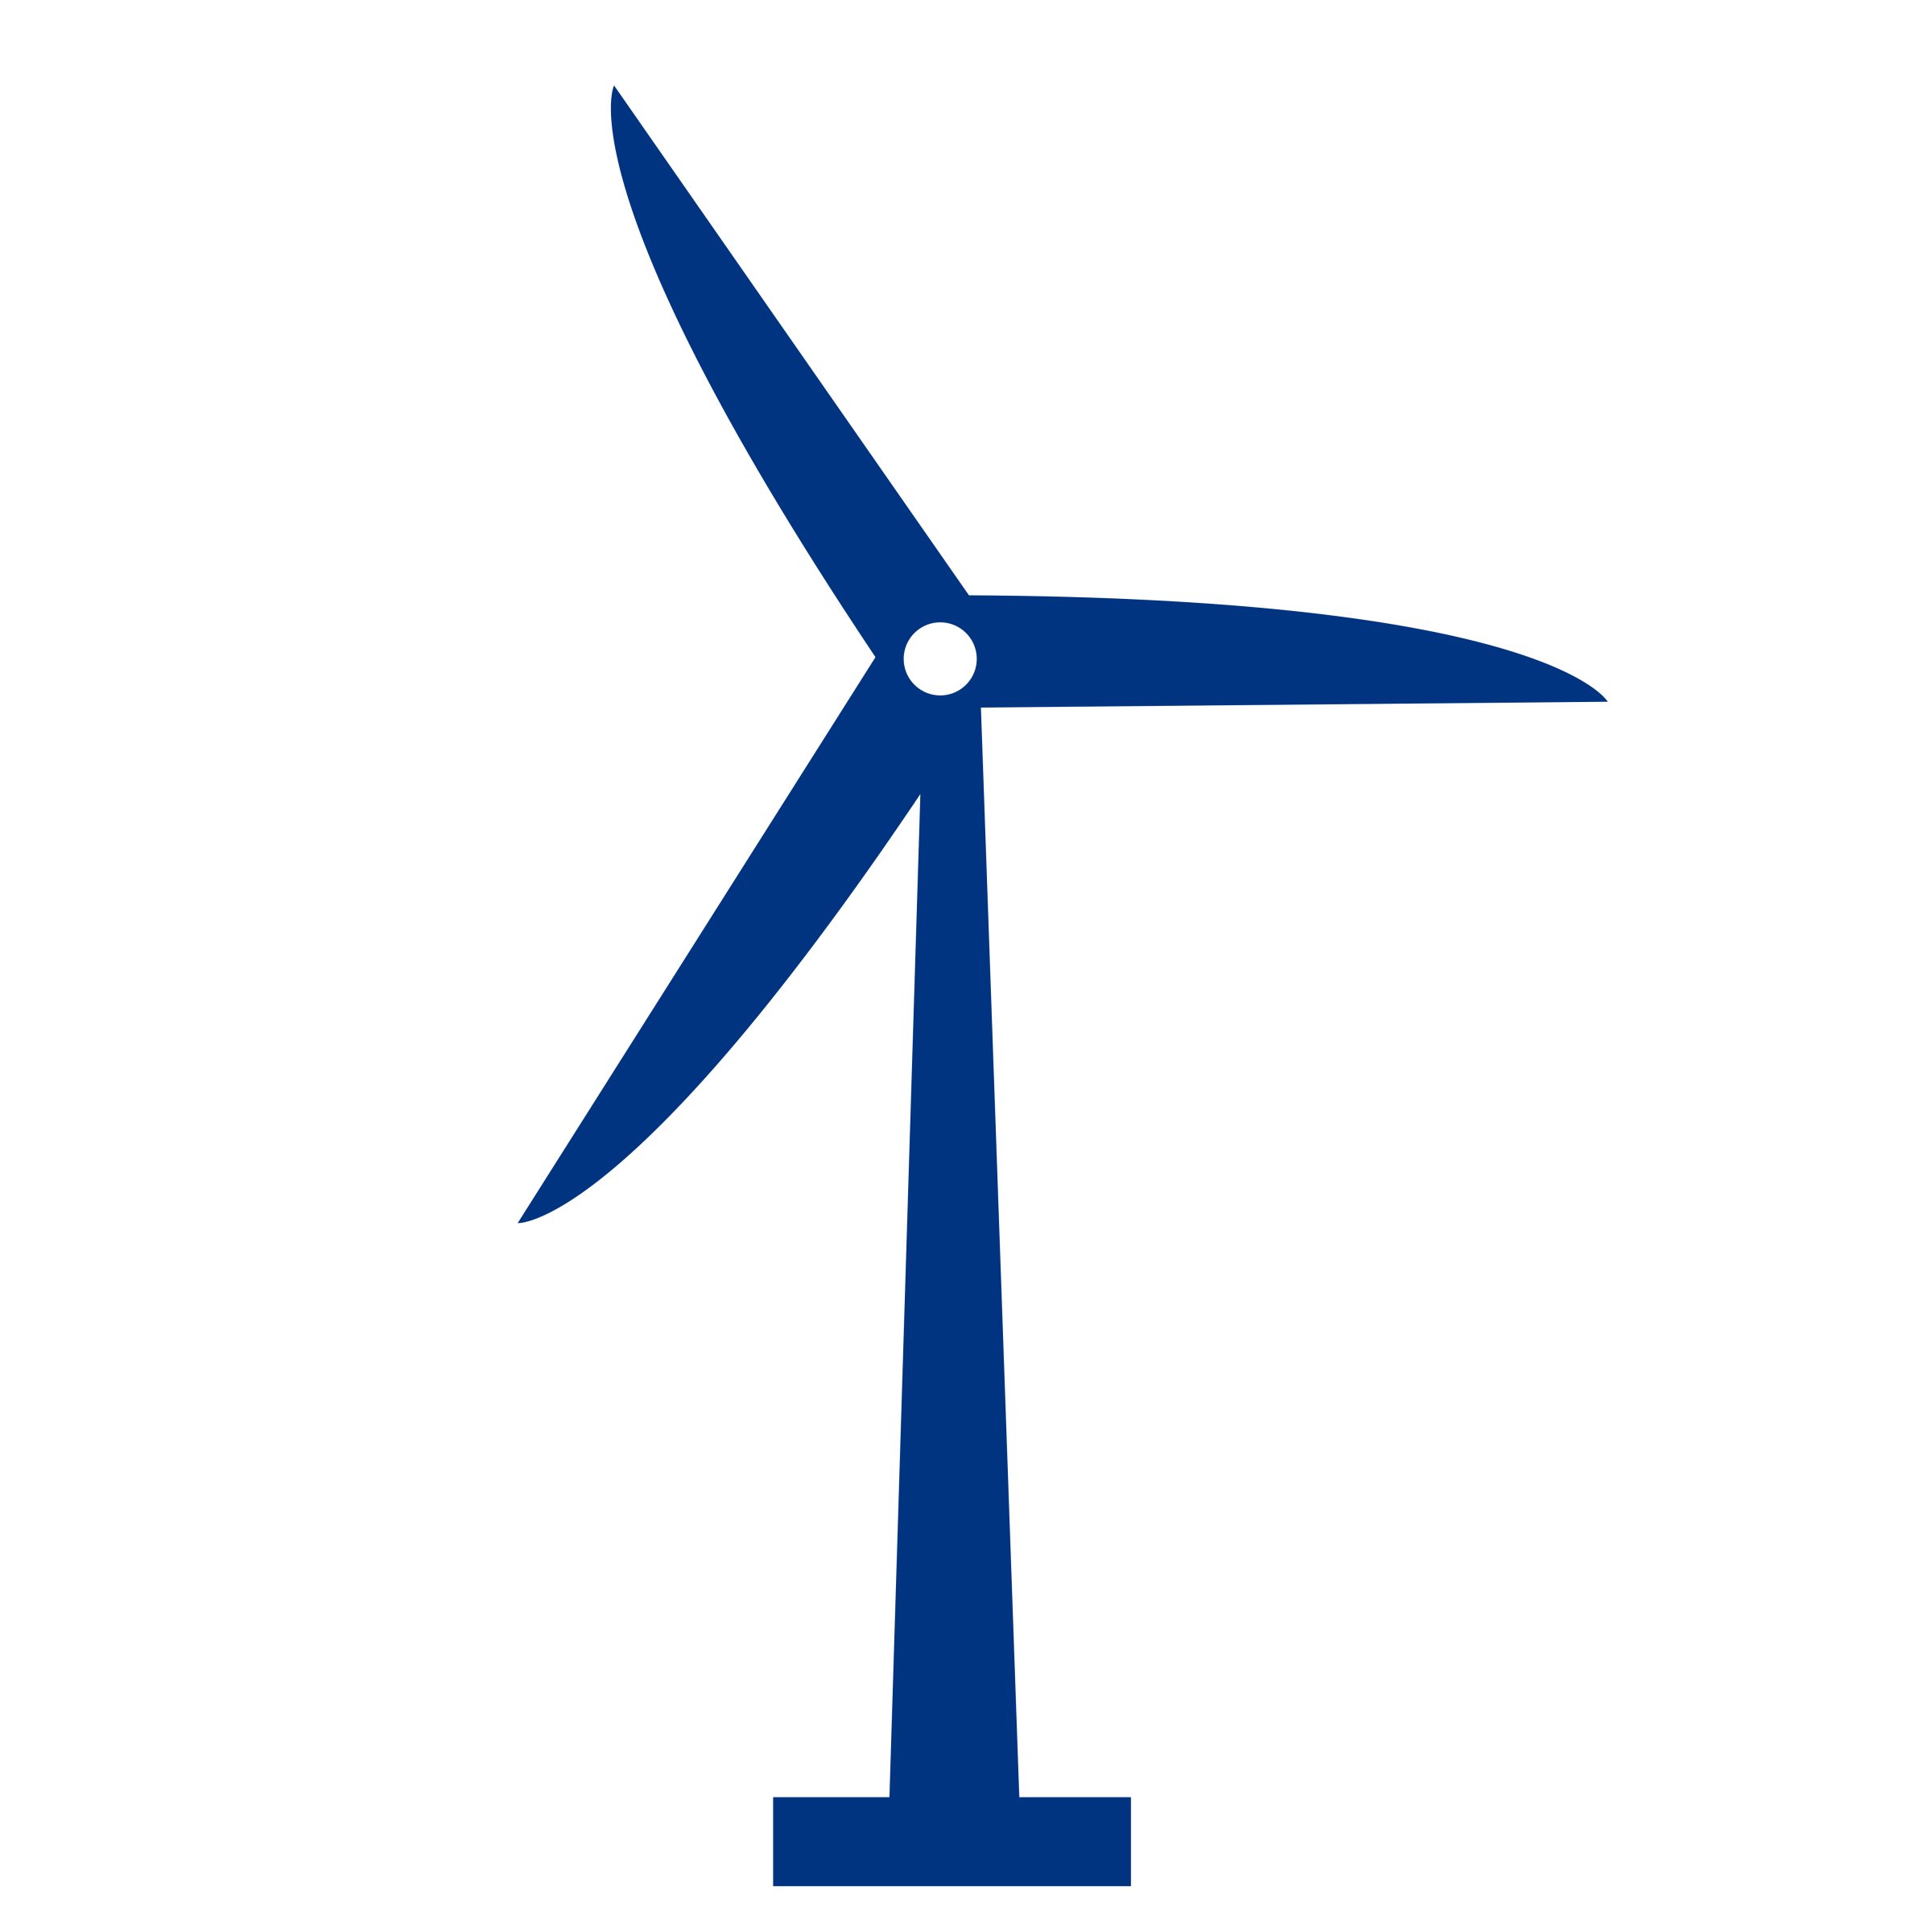 Windmill sources big image. Energy clipart electrical energy